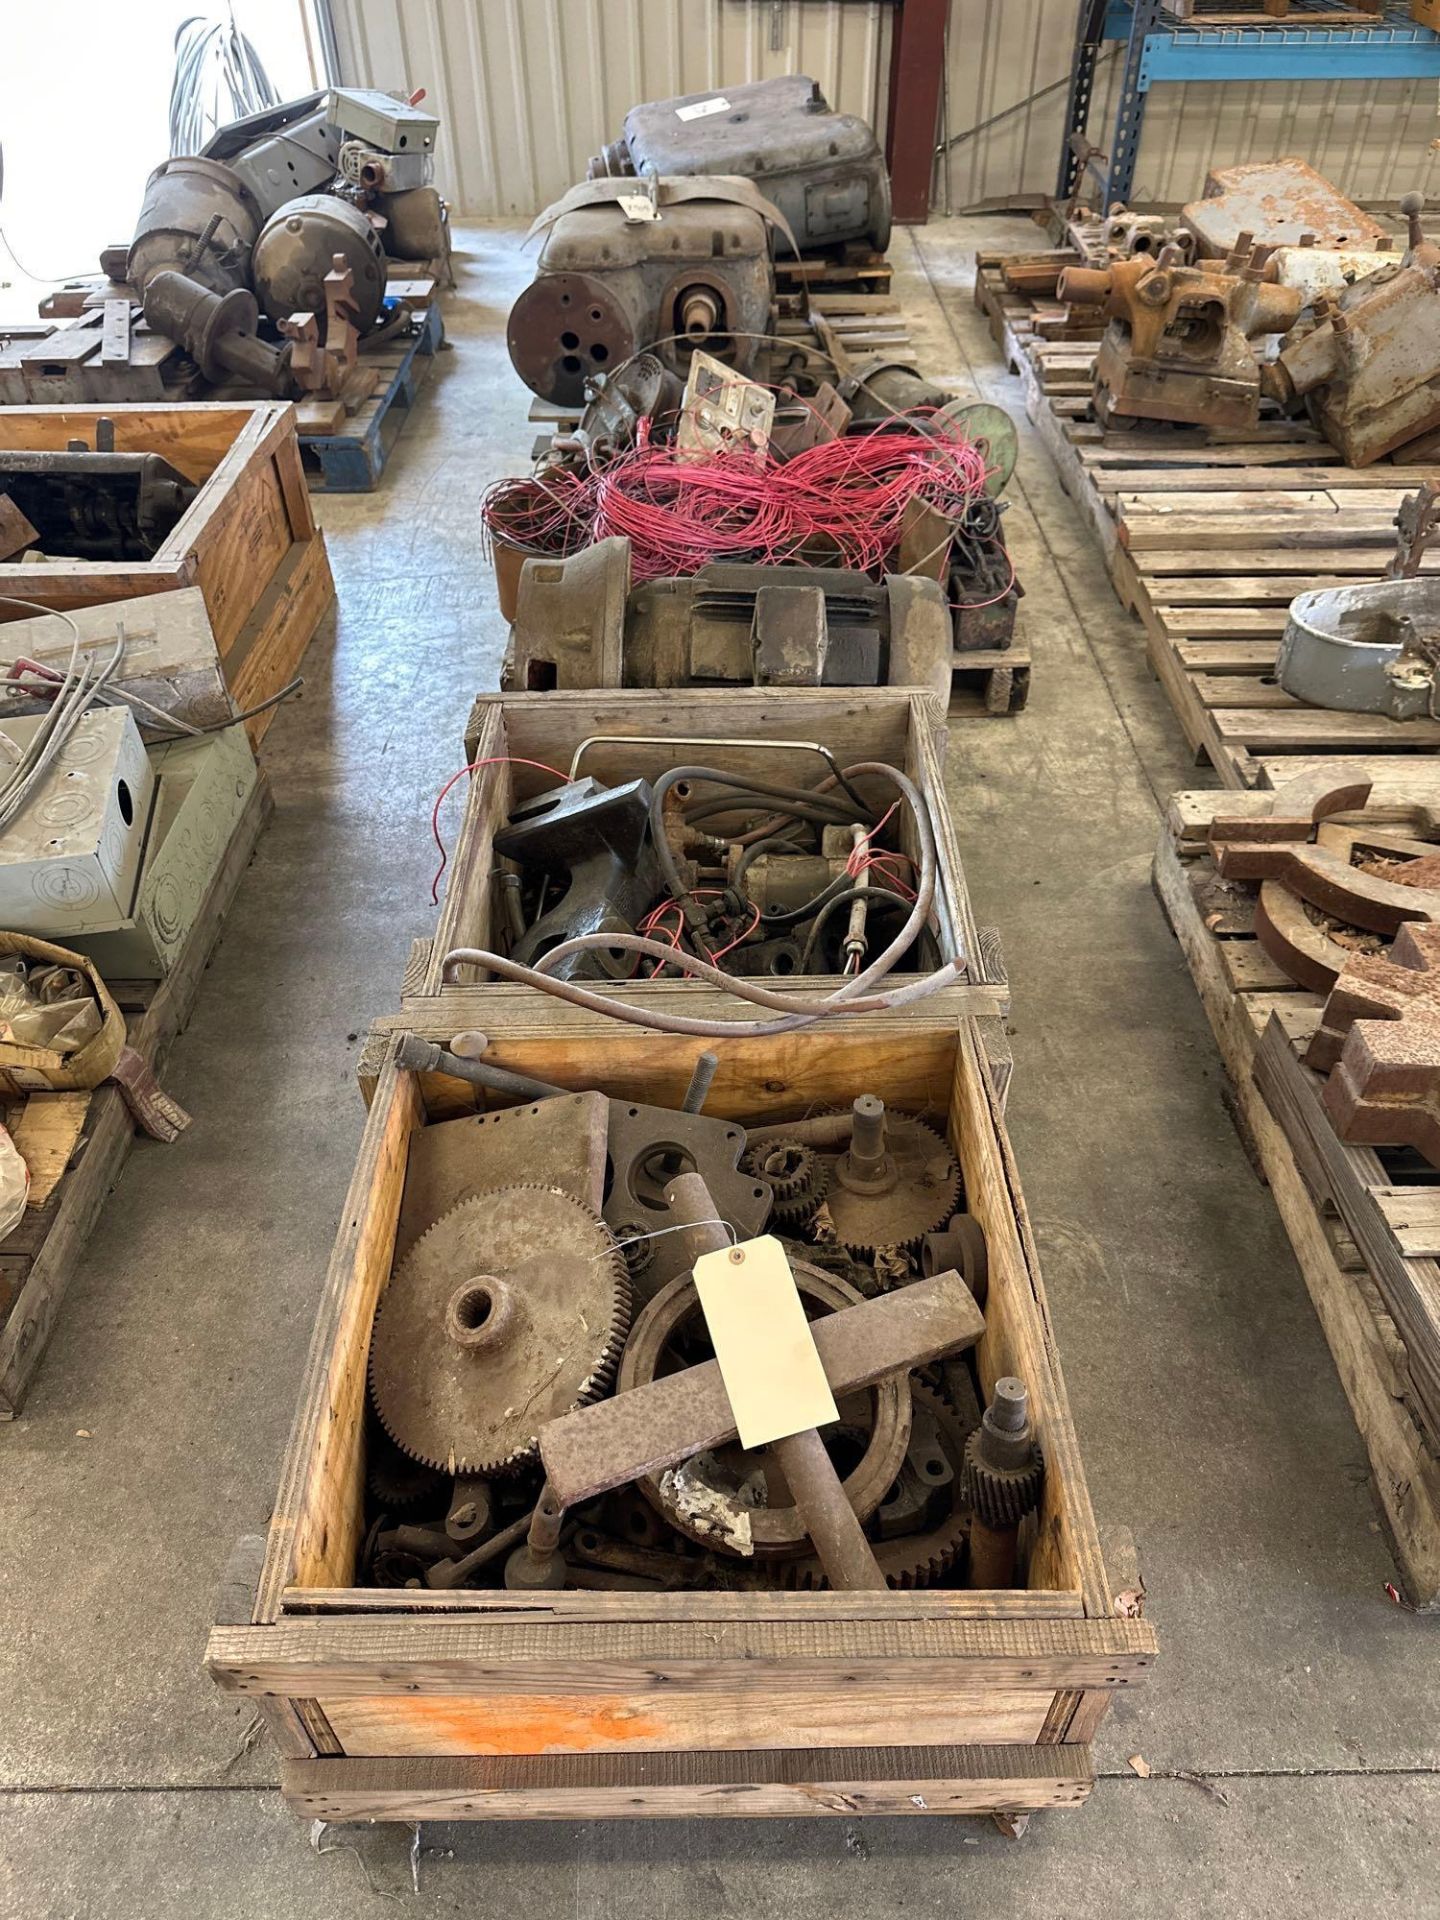 Lot of 14 Pallets of Axelson Parts: Motors, Gear Boxes, Steady Rests, Tail Stocks, Electrical Cabine - Image 10 of 31